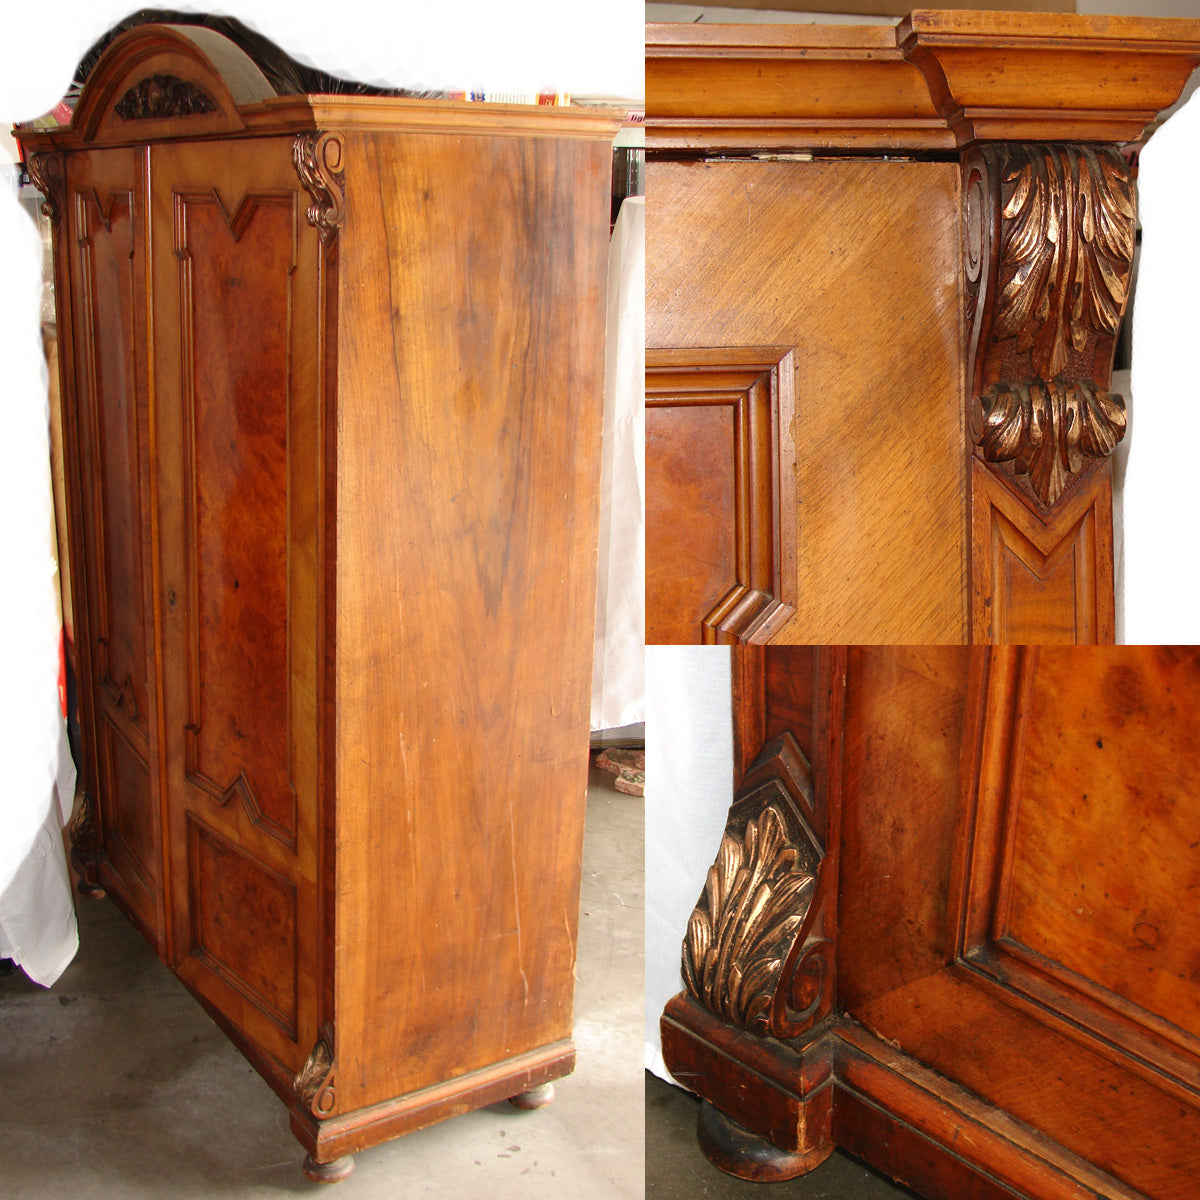 Antique 76.5" Tall Armoire or Wardrobe, Burled Veneer Doors with Carved & Gilded Acanthus Accents